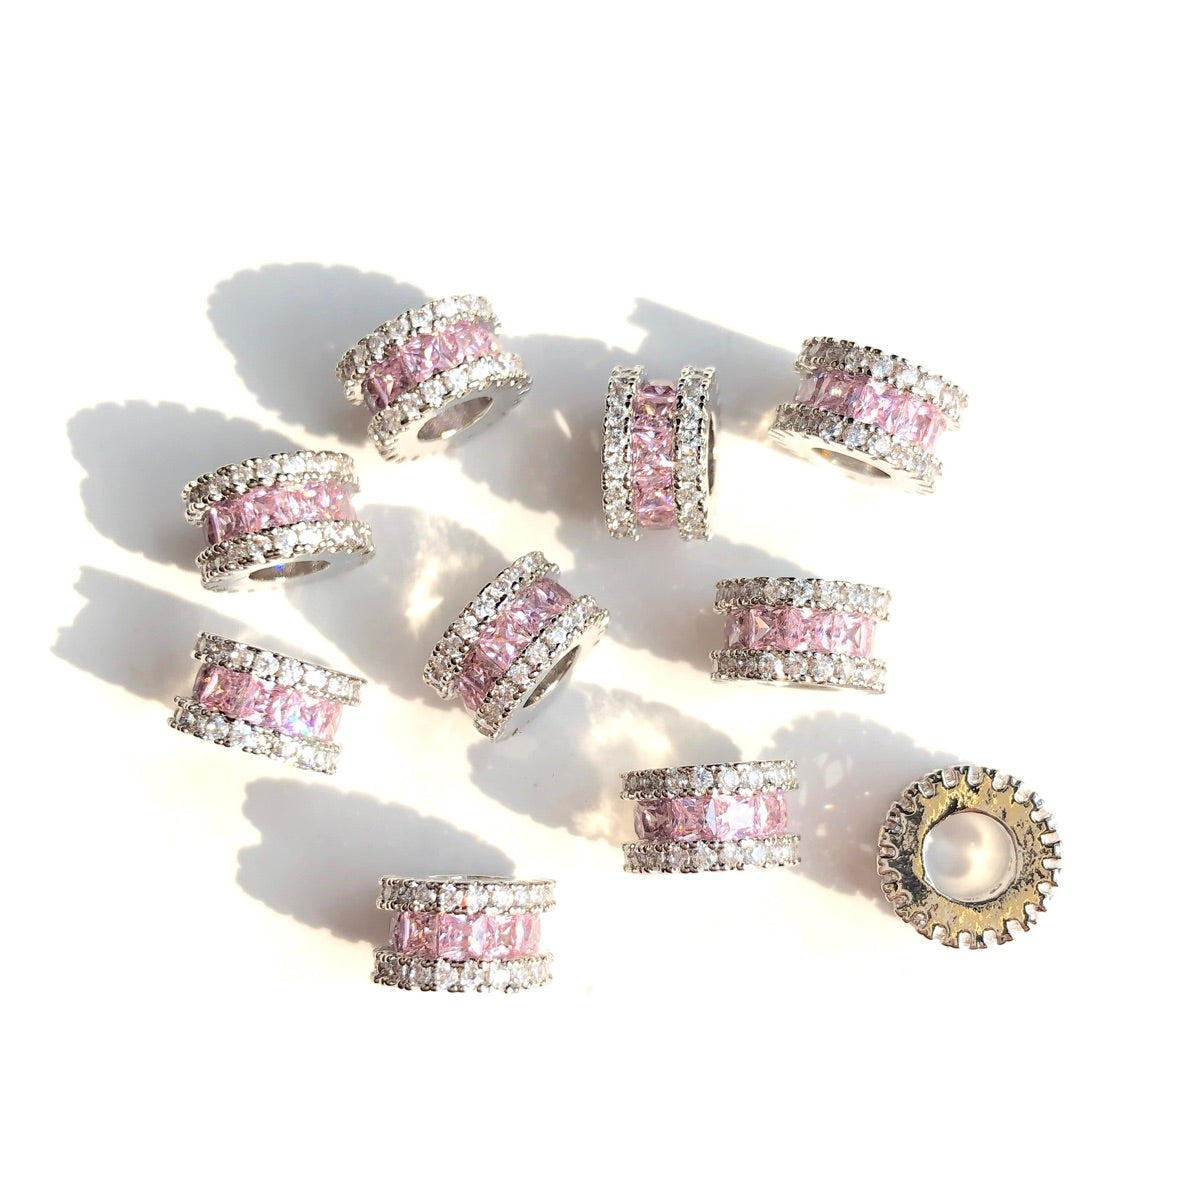 10-20-50pcs/lot 8.6mm Pink Square CZ Paved Big Hole Rondelle Wheel Spacers Silver CZ Paved Spacers Big Hole Beads New Spacers Arrivals Rondelle Beads Wholesale Charms Beads Beyond